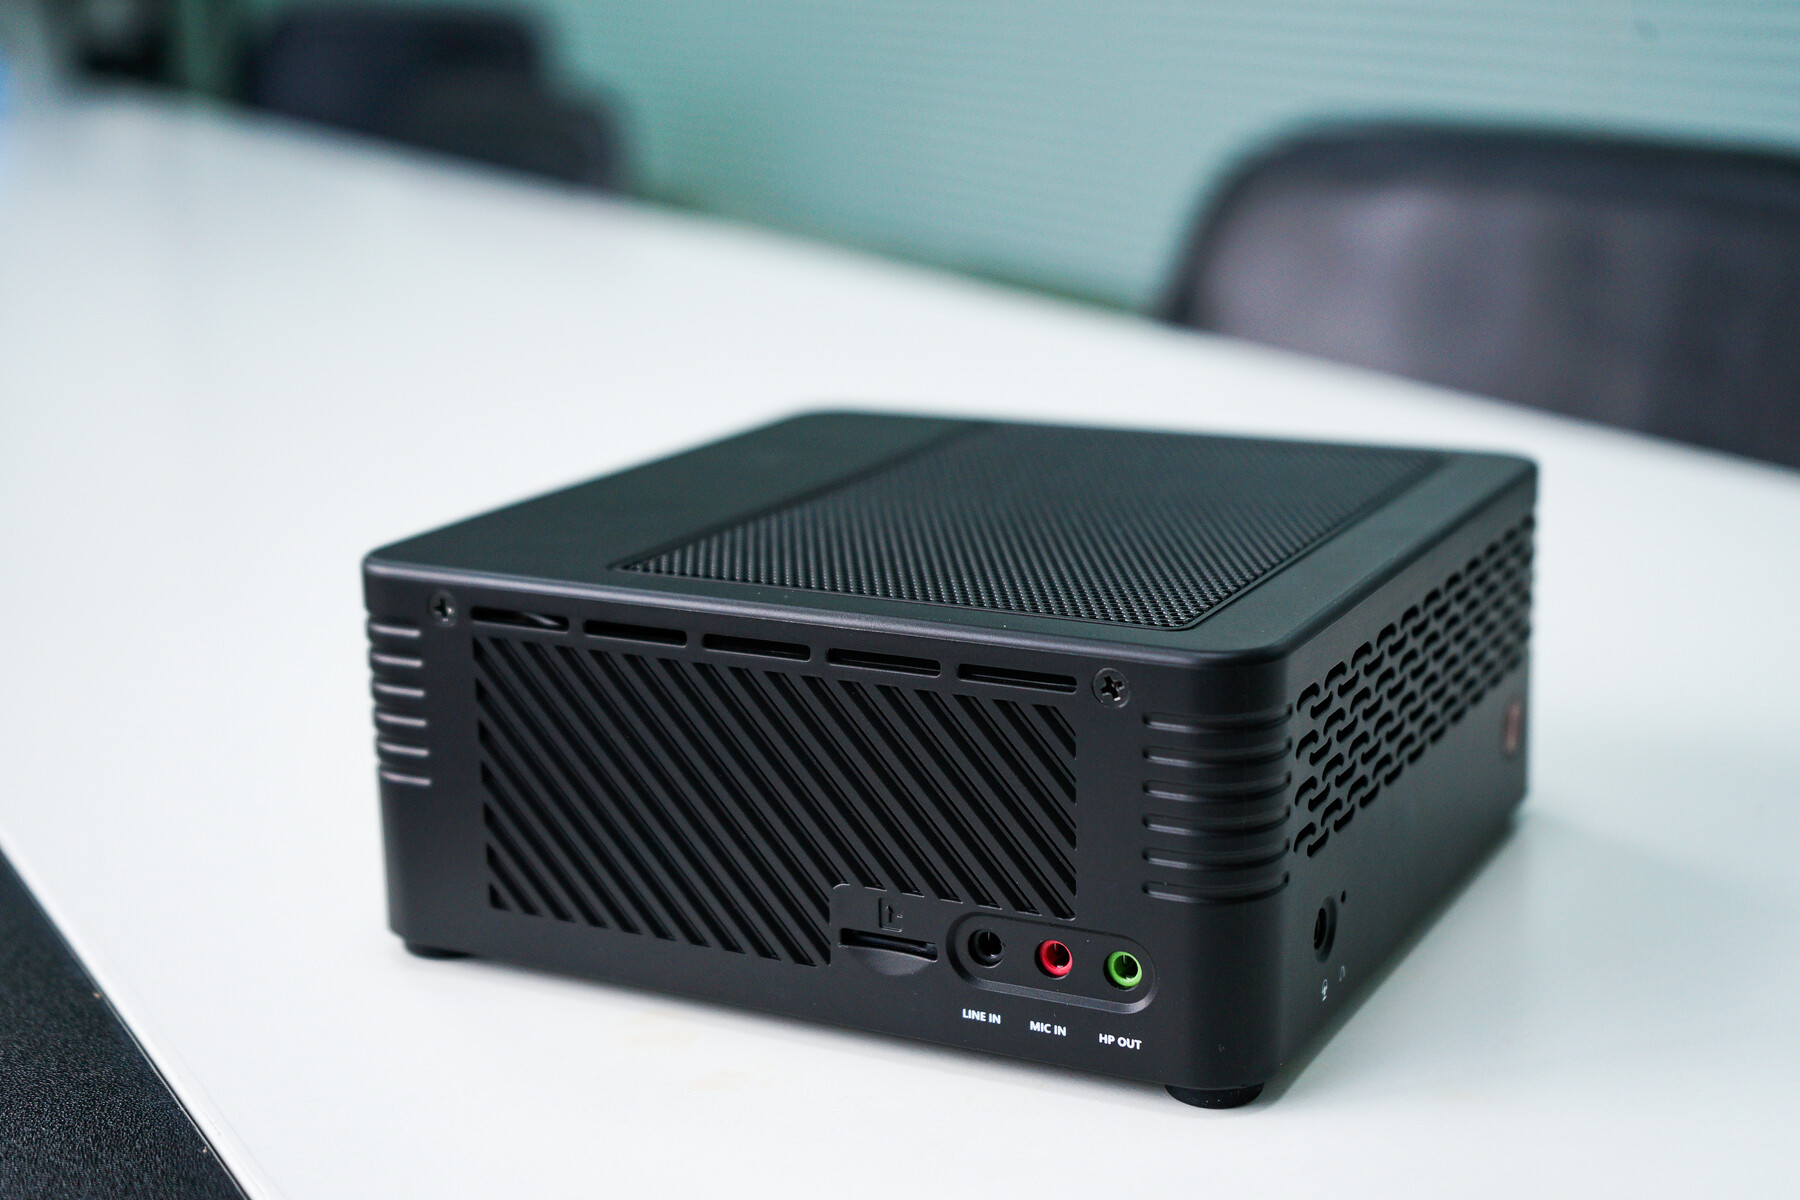 Minisforum H31G review: A surprisingly powerful entry to PC gaming